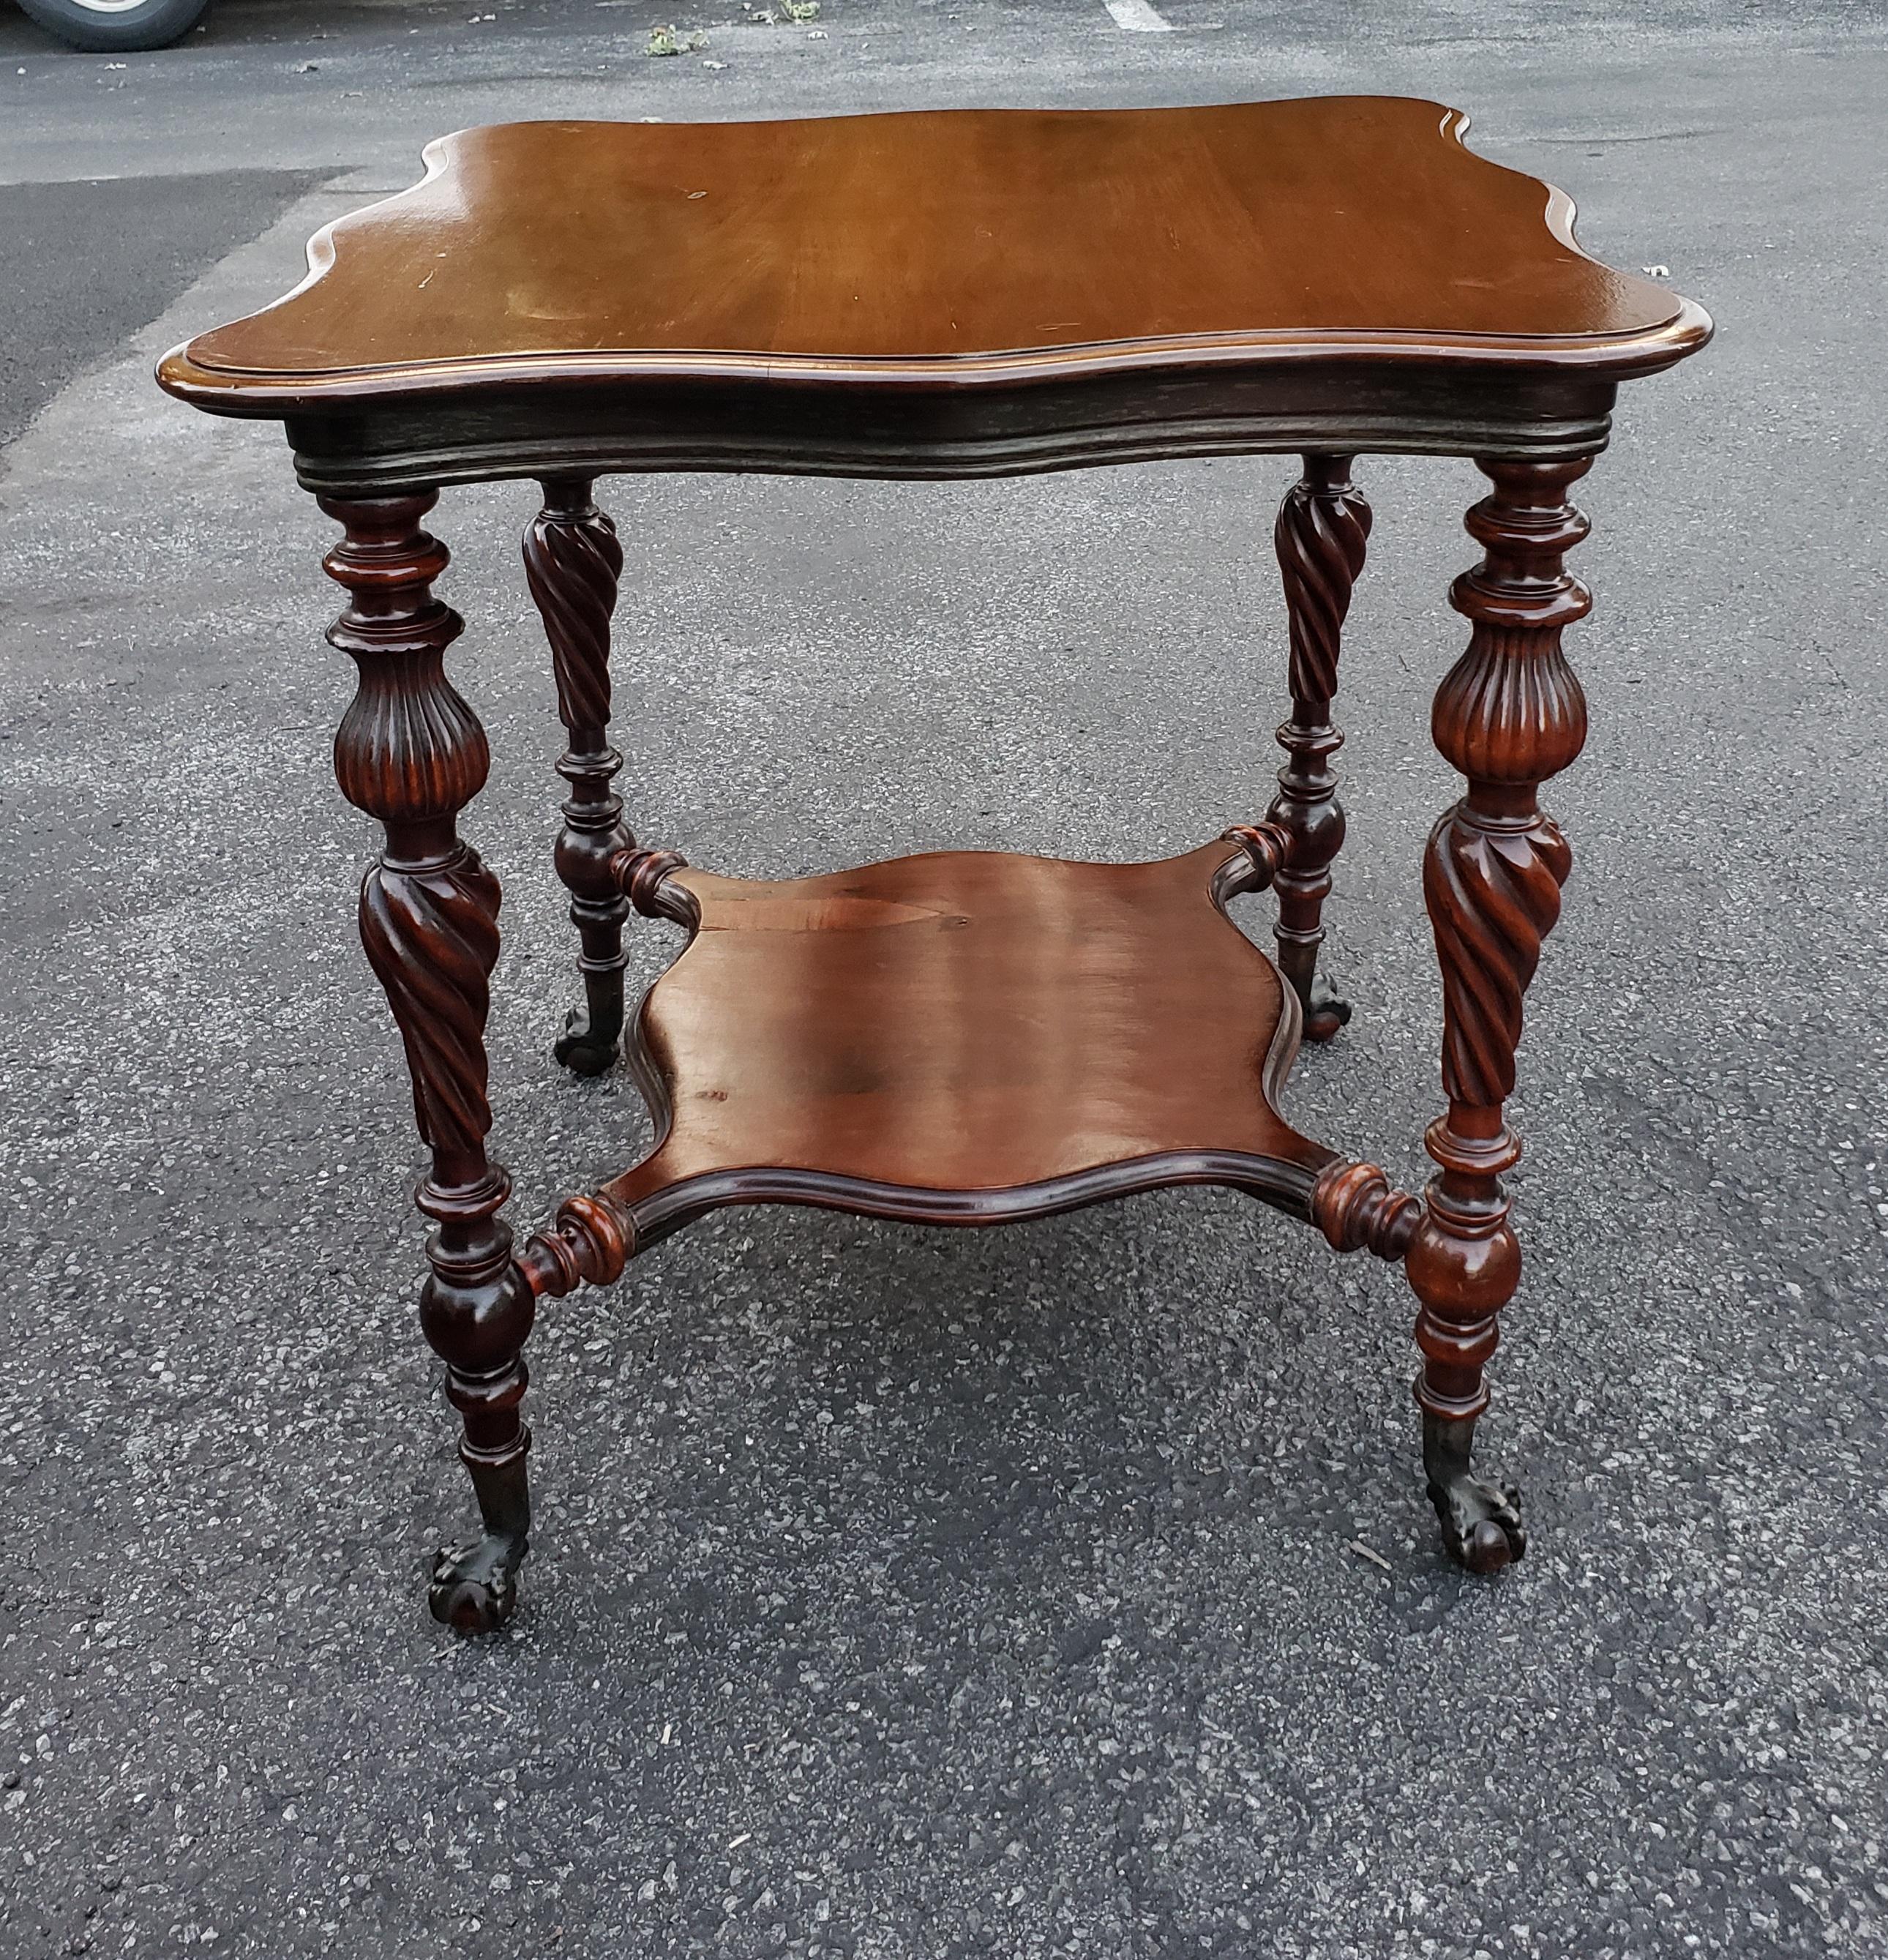 A 1930s Regency Style Mahogany Tiered Tea Table with Ball Claw Feet and a combination of bobbing, rope twisted and reedled legs. Measures 27